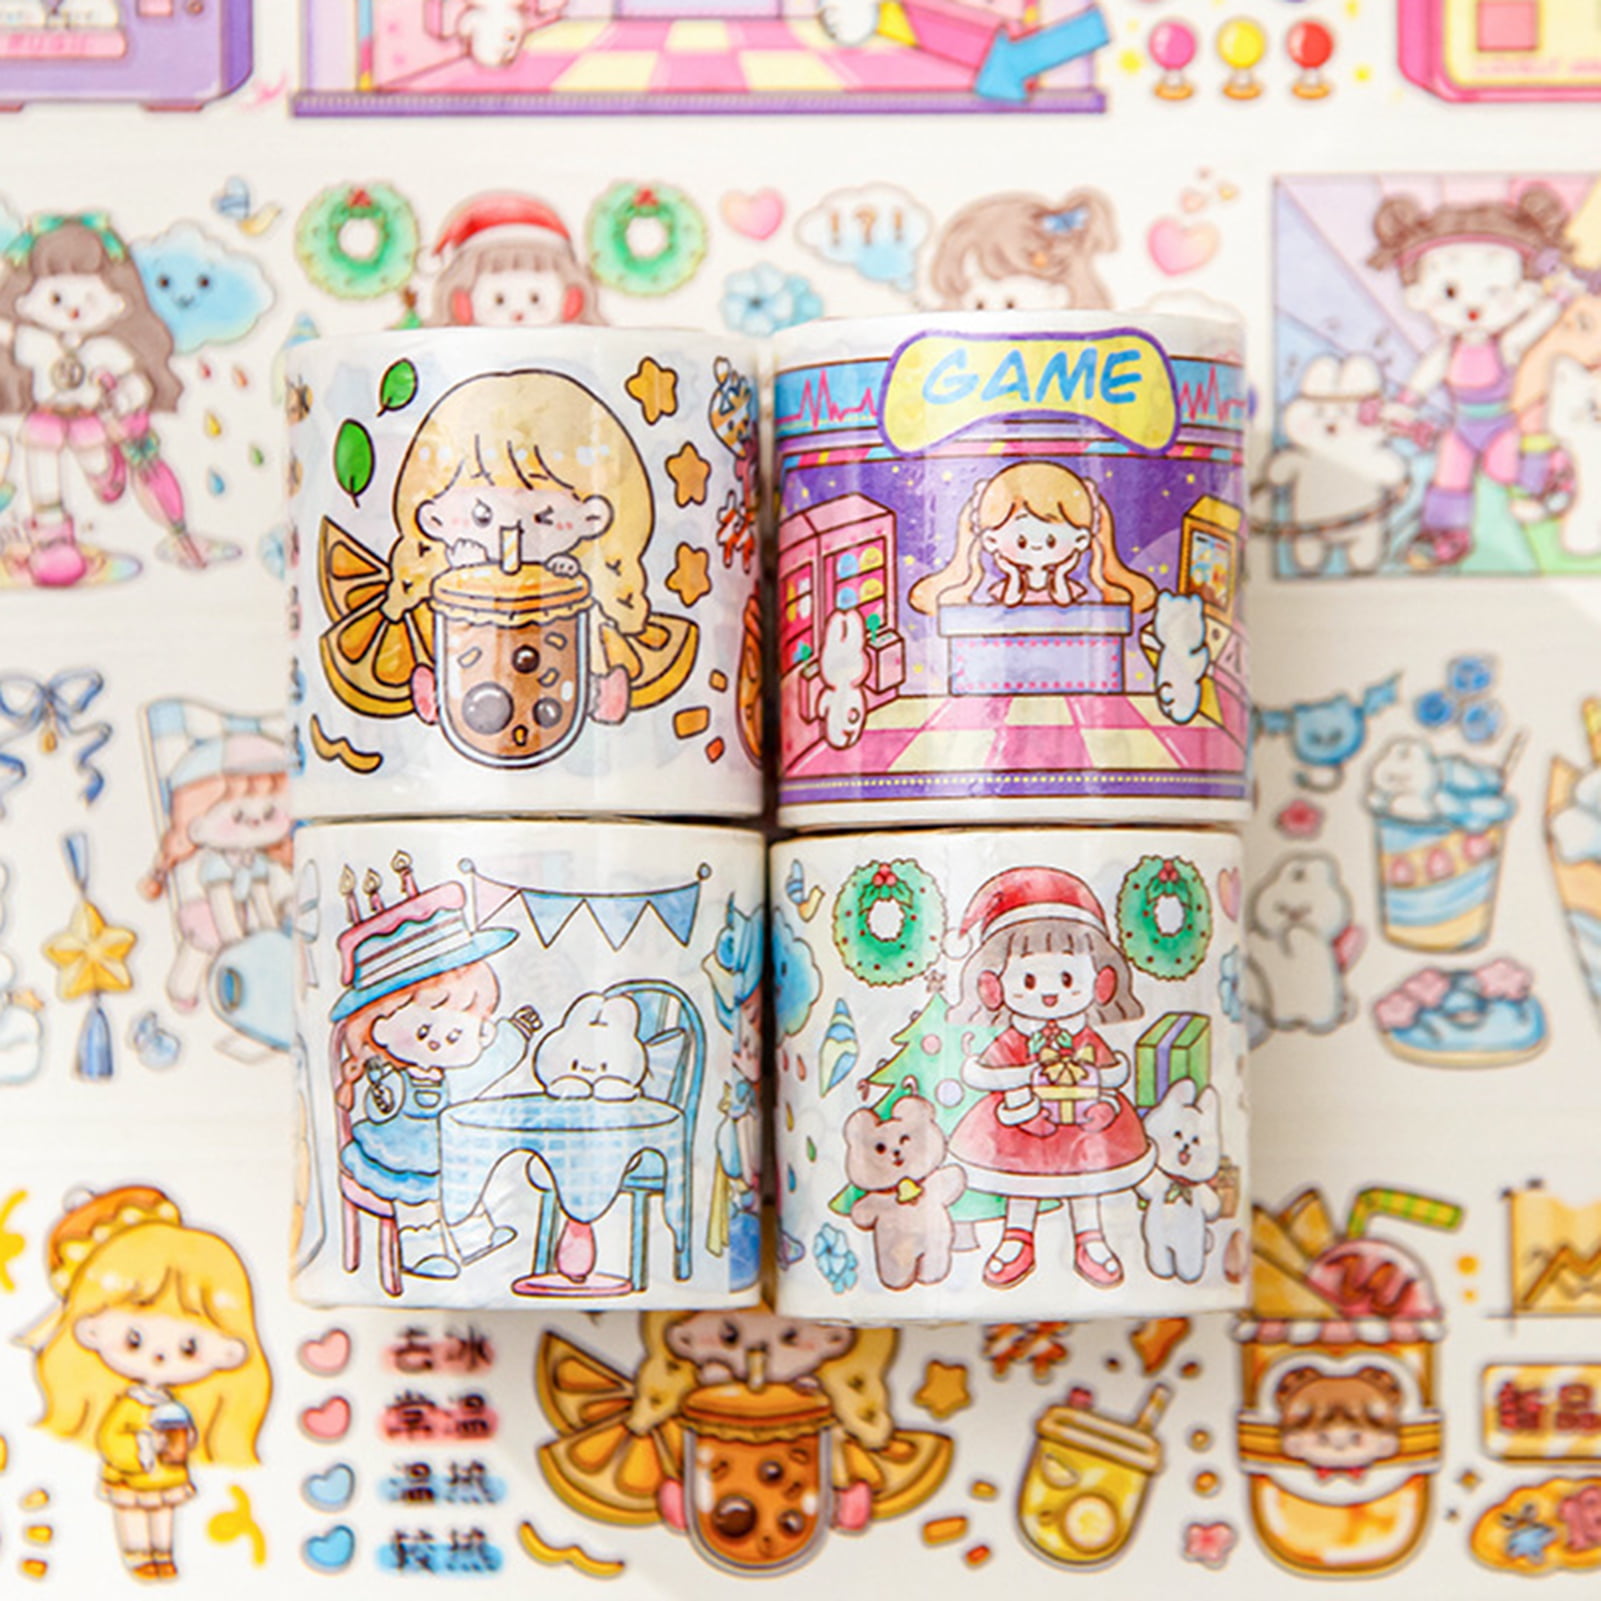  DEARMAMY 1 Roll Scrapbook Adhesive Tape Retro Decor Packing  Tapes Gift Wrapping Tape Hand Account Tapes Cute Packing Tape Wrapping  Tapes Cute Tape Seal Decorate Fu Character Sticker Vintage : Office